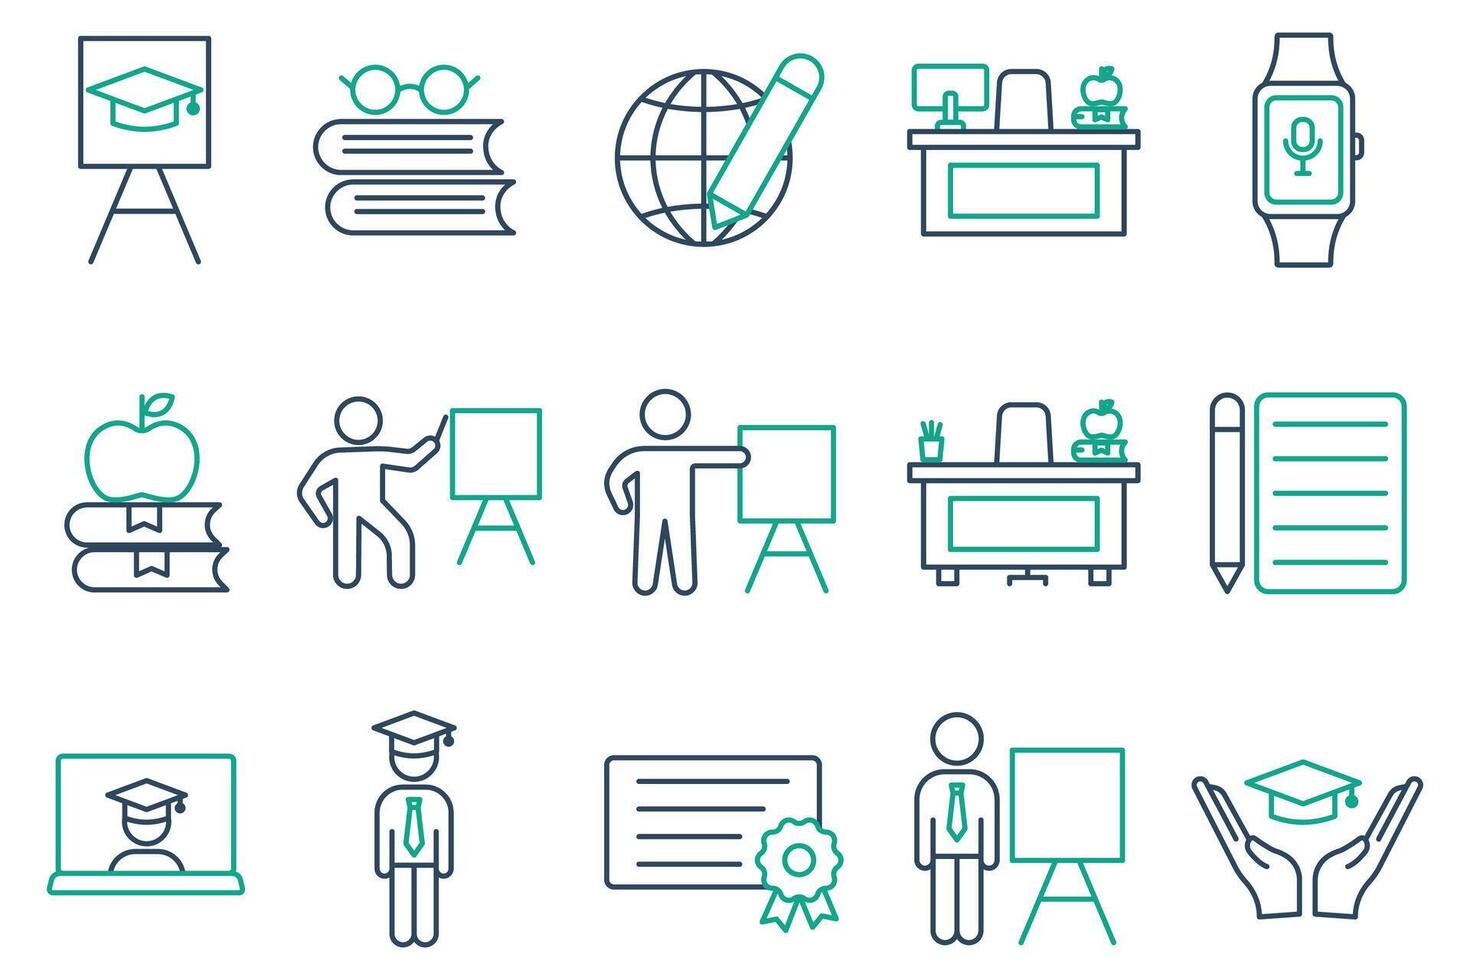 education icons. teacher, teacher desk, graduation hat, pencil and notepad, book, student. set of icons related to education. line icon style. navigation vector illustration